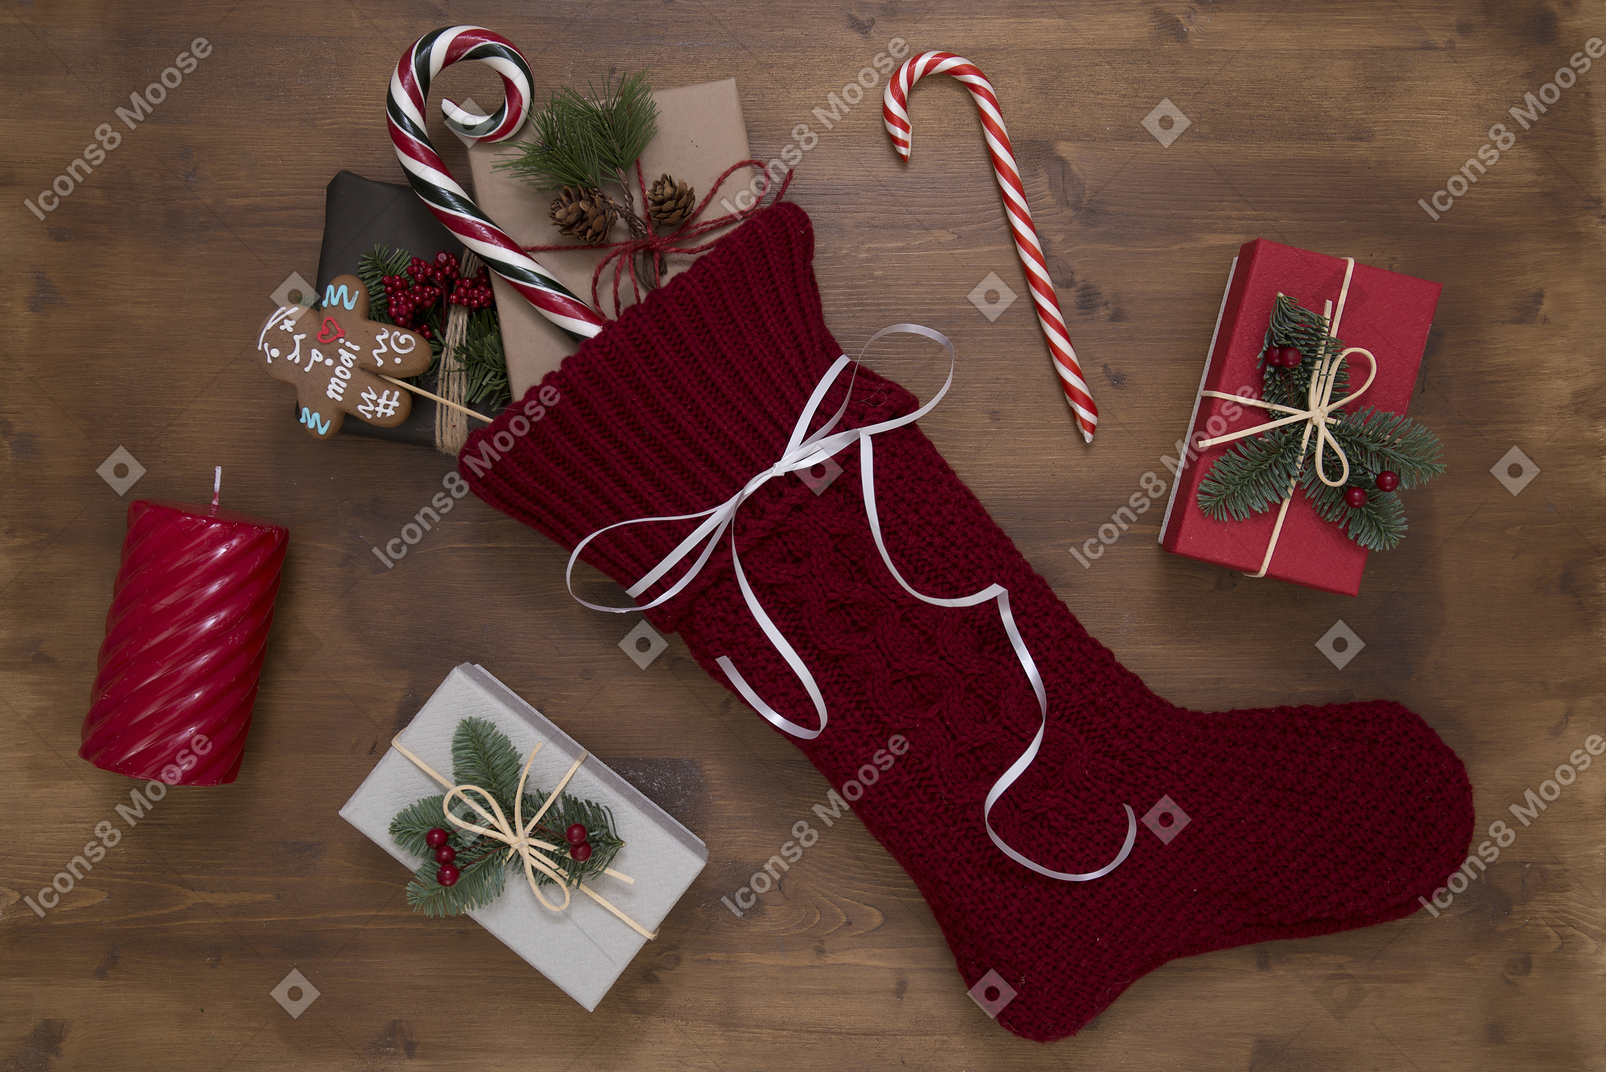 Christmas stocking and gifts on wooden background